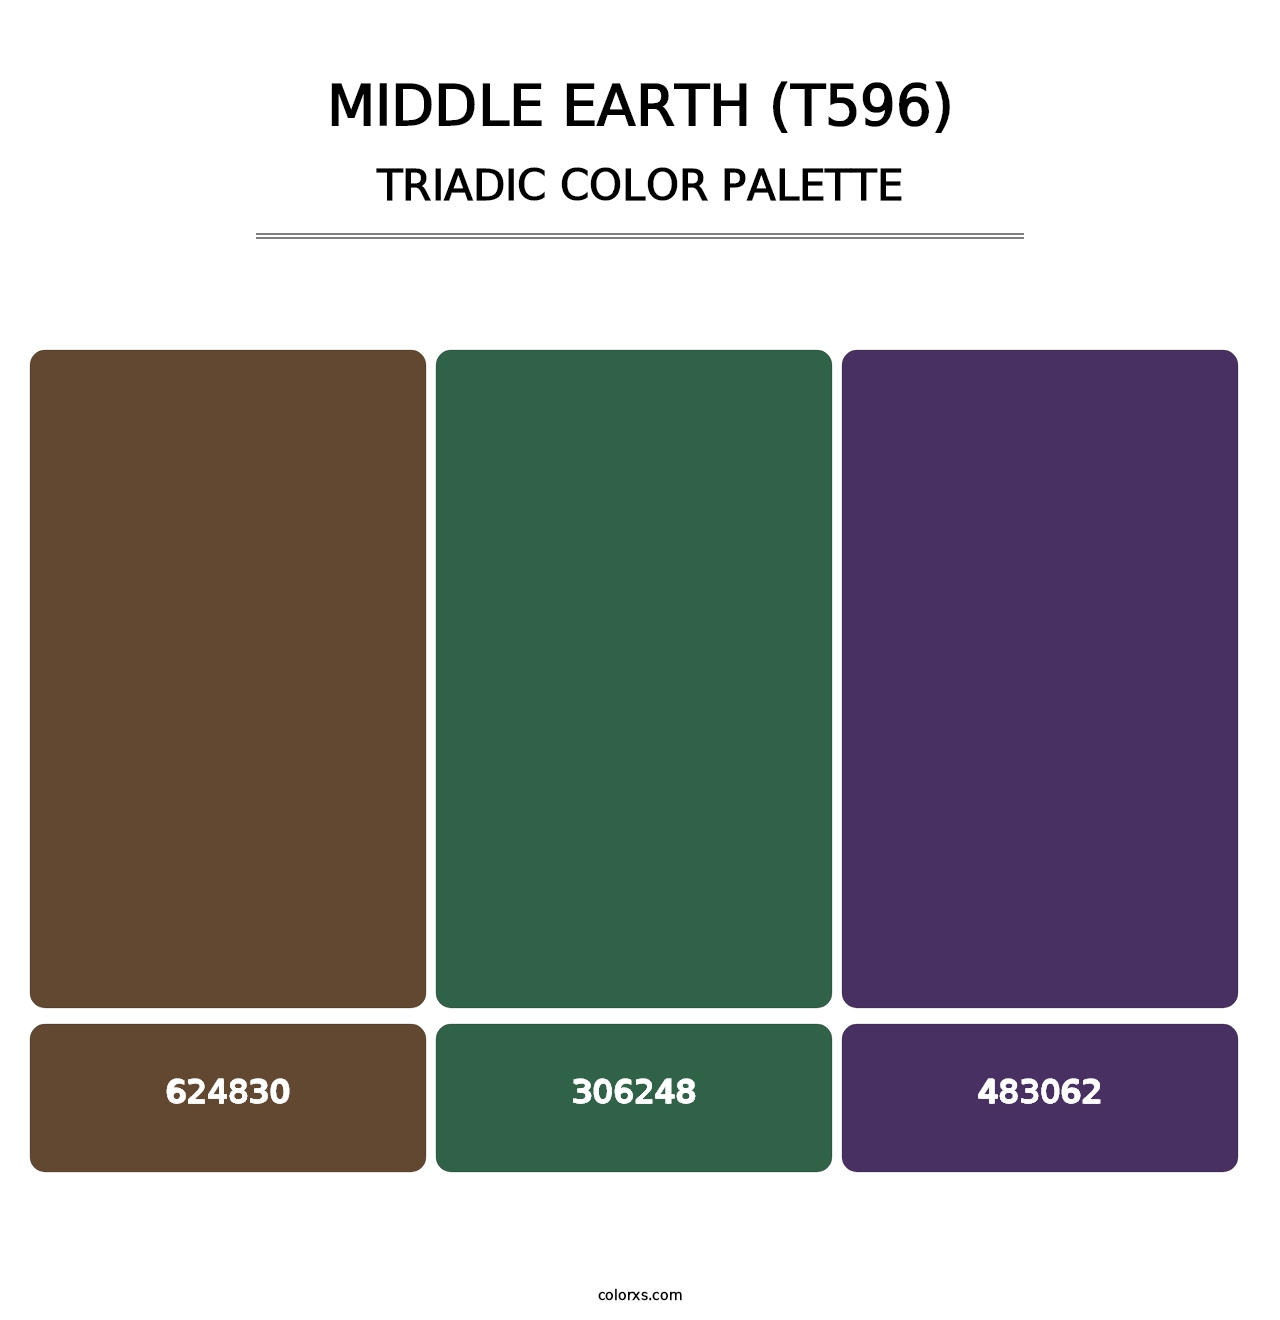 Middle Earth (T596) - Triadic Color Palette